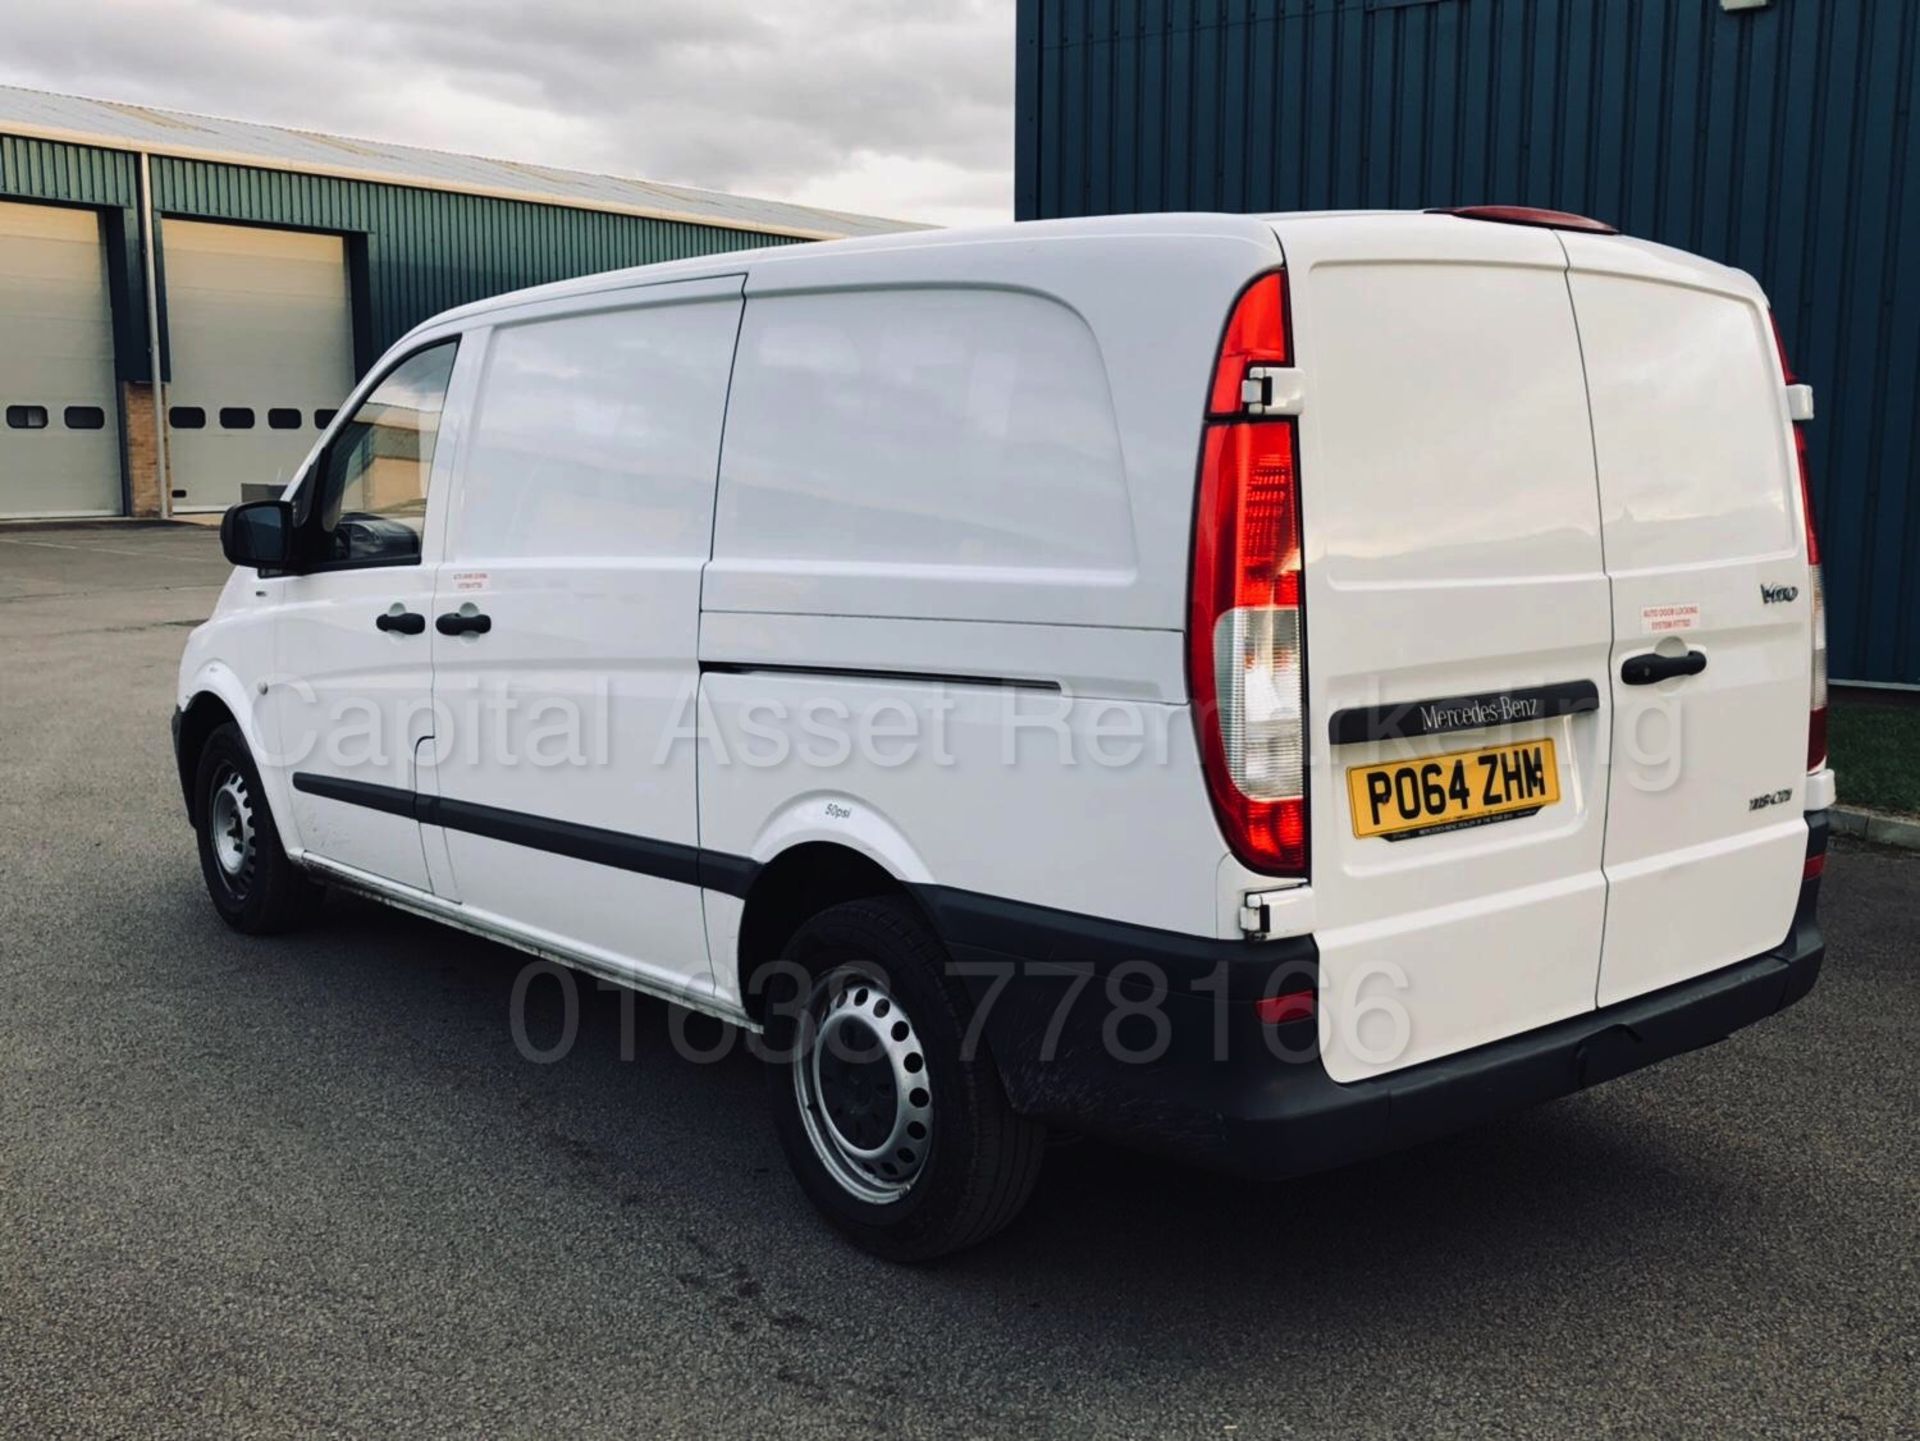 MERCEDES VITO 113CDI LWB (2015 MODEL - NEW SHAPE) 1 OWNER - LOW MILES - ELEC PACK - 130BHP - 6 SPEED - Image 5 of 30